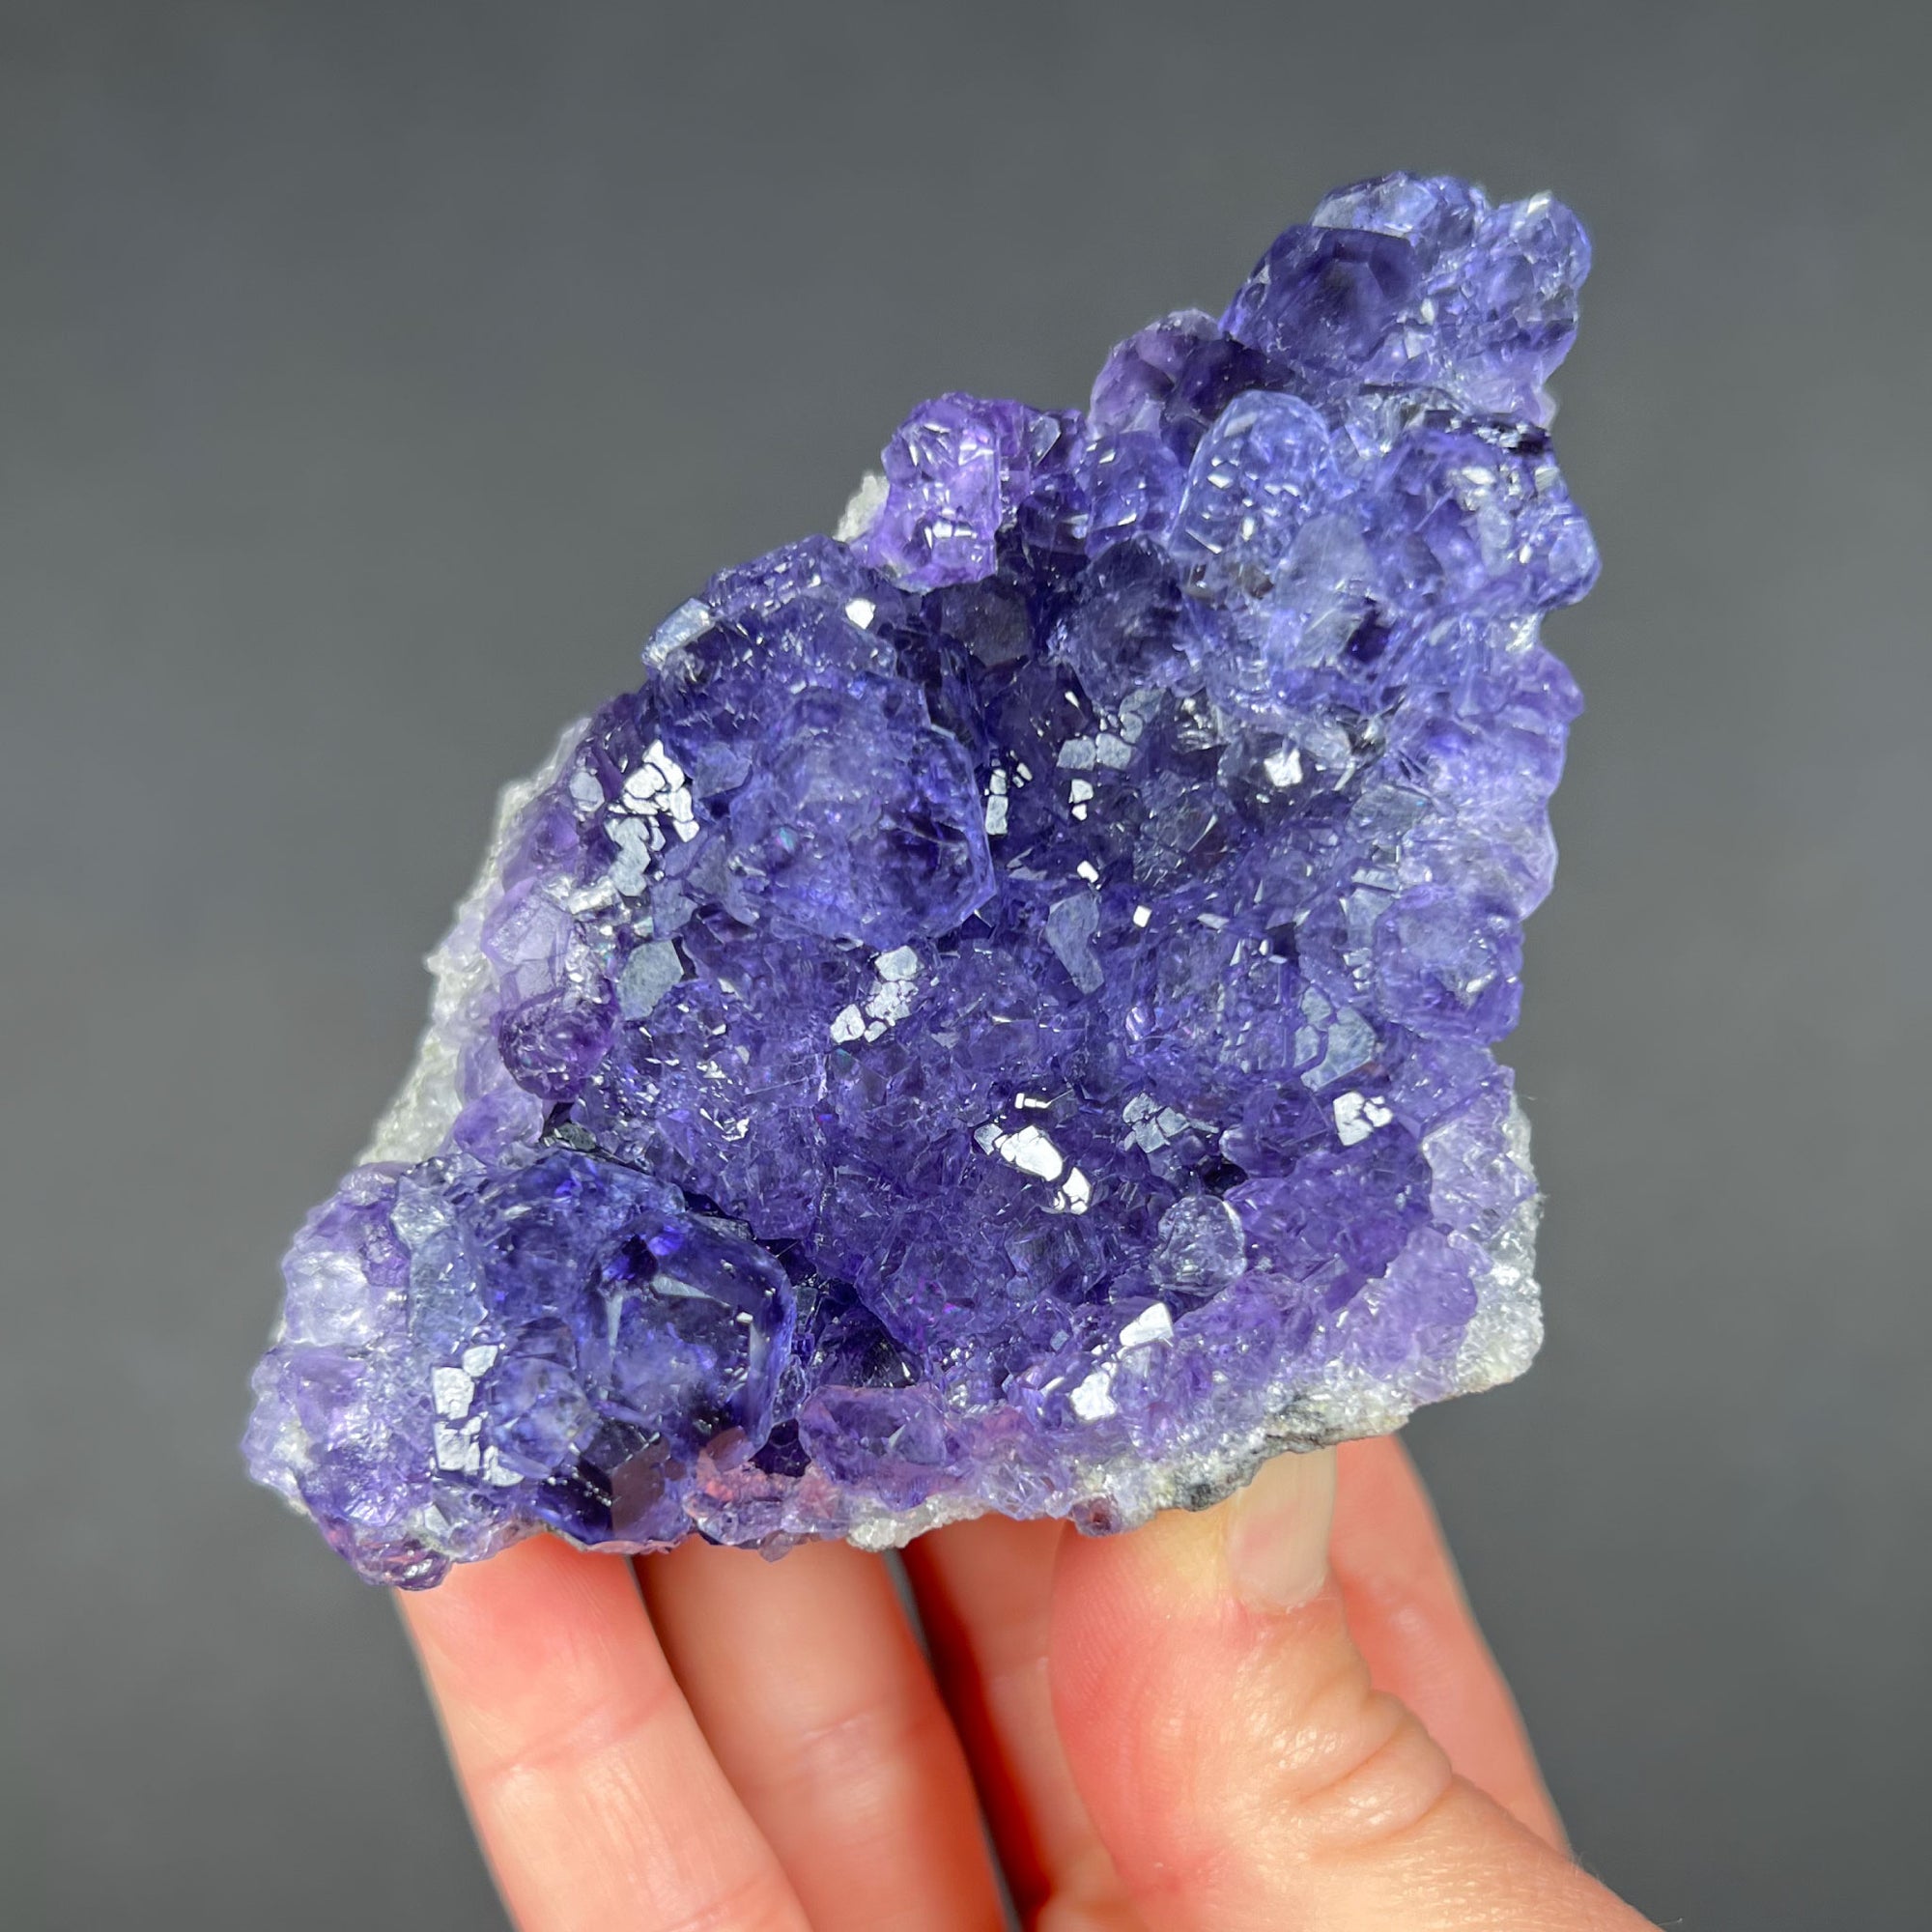 Purple and Blue Crystals of Fluorite from China